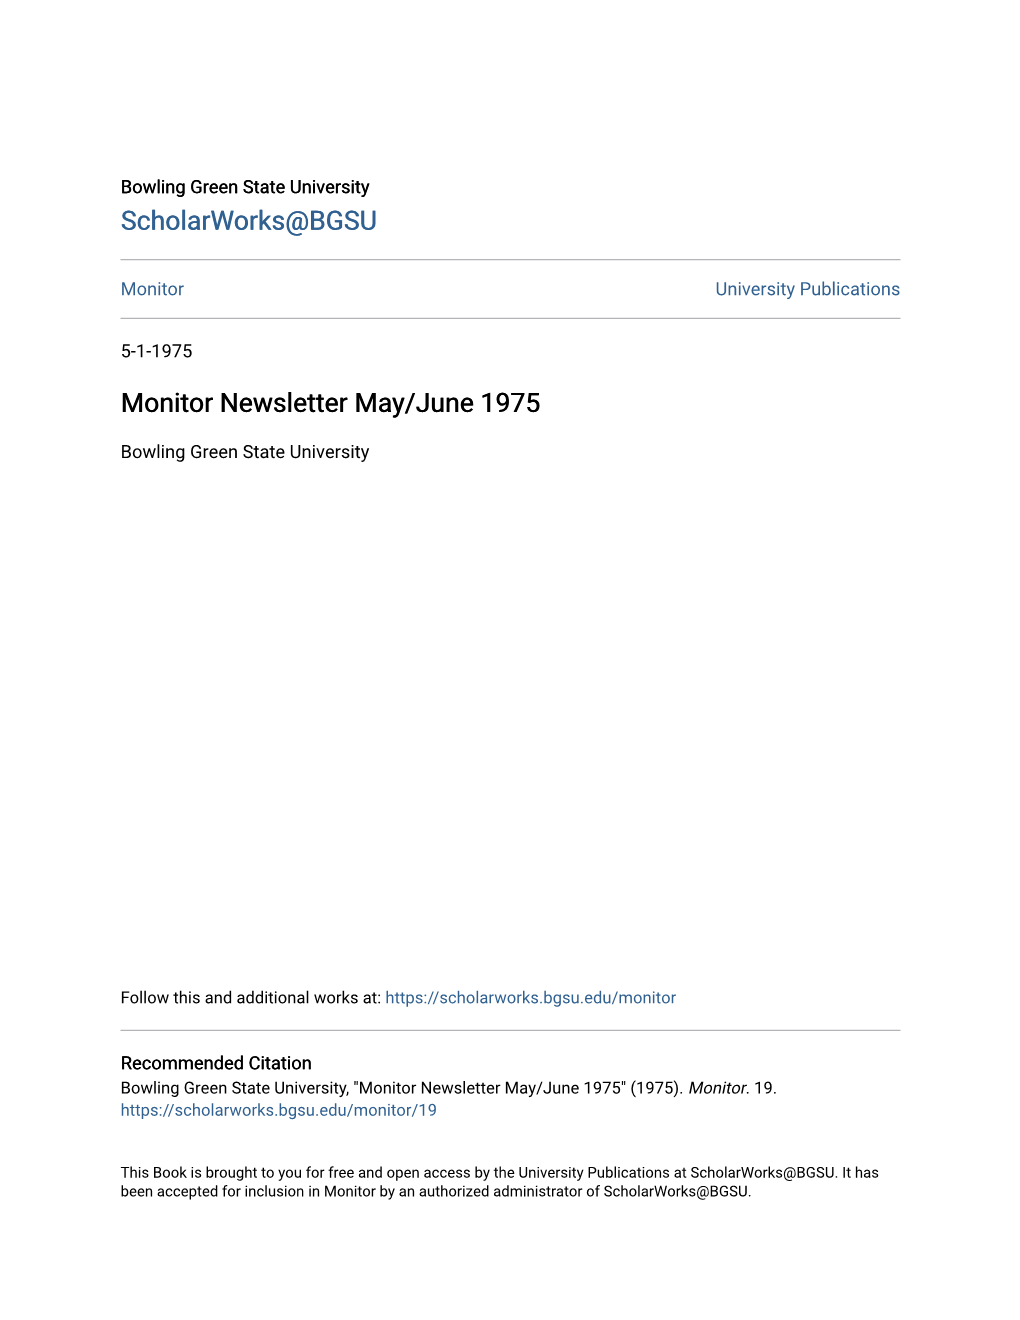 Monitor Newsletter May/June 1975